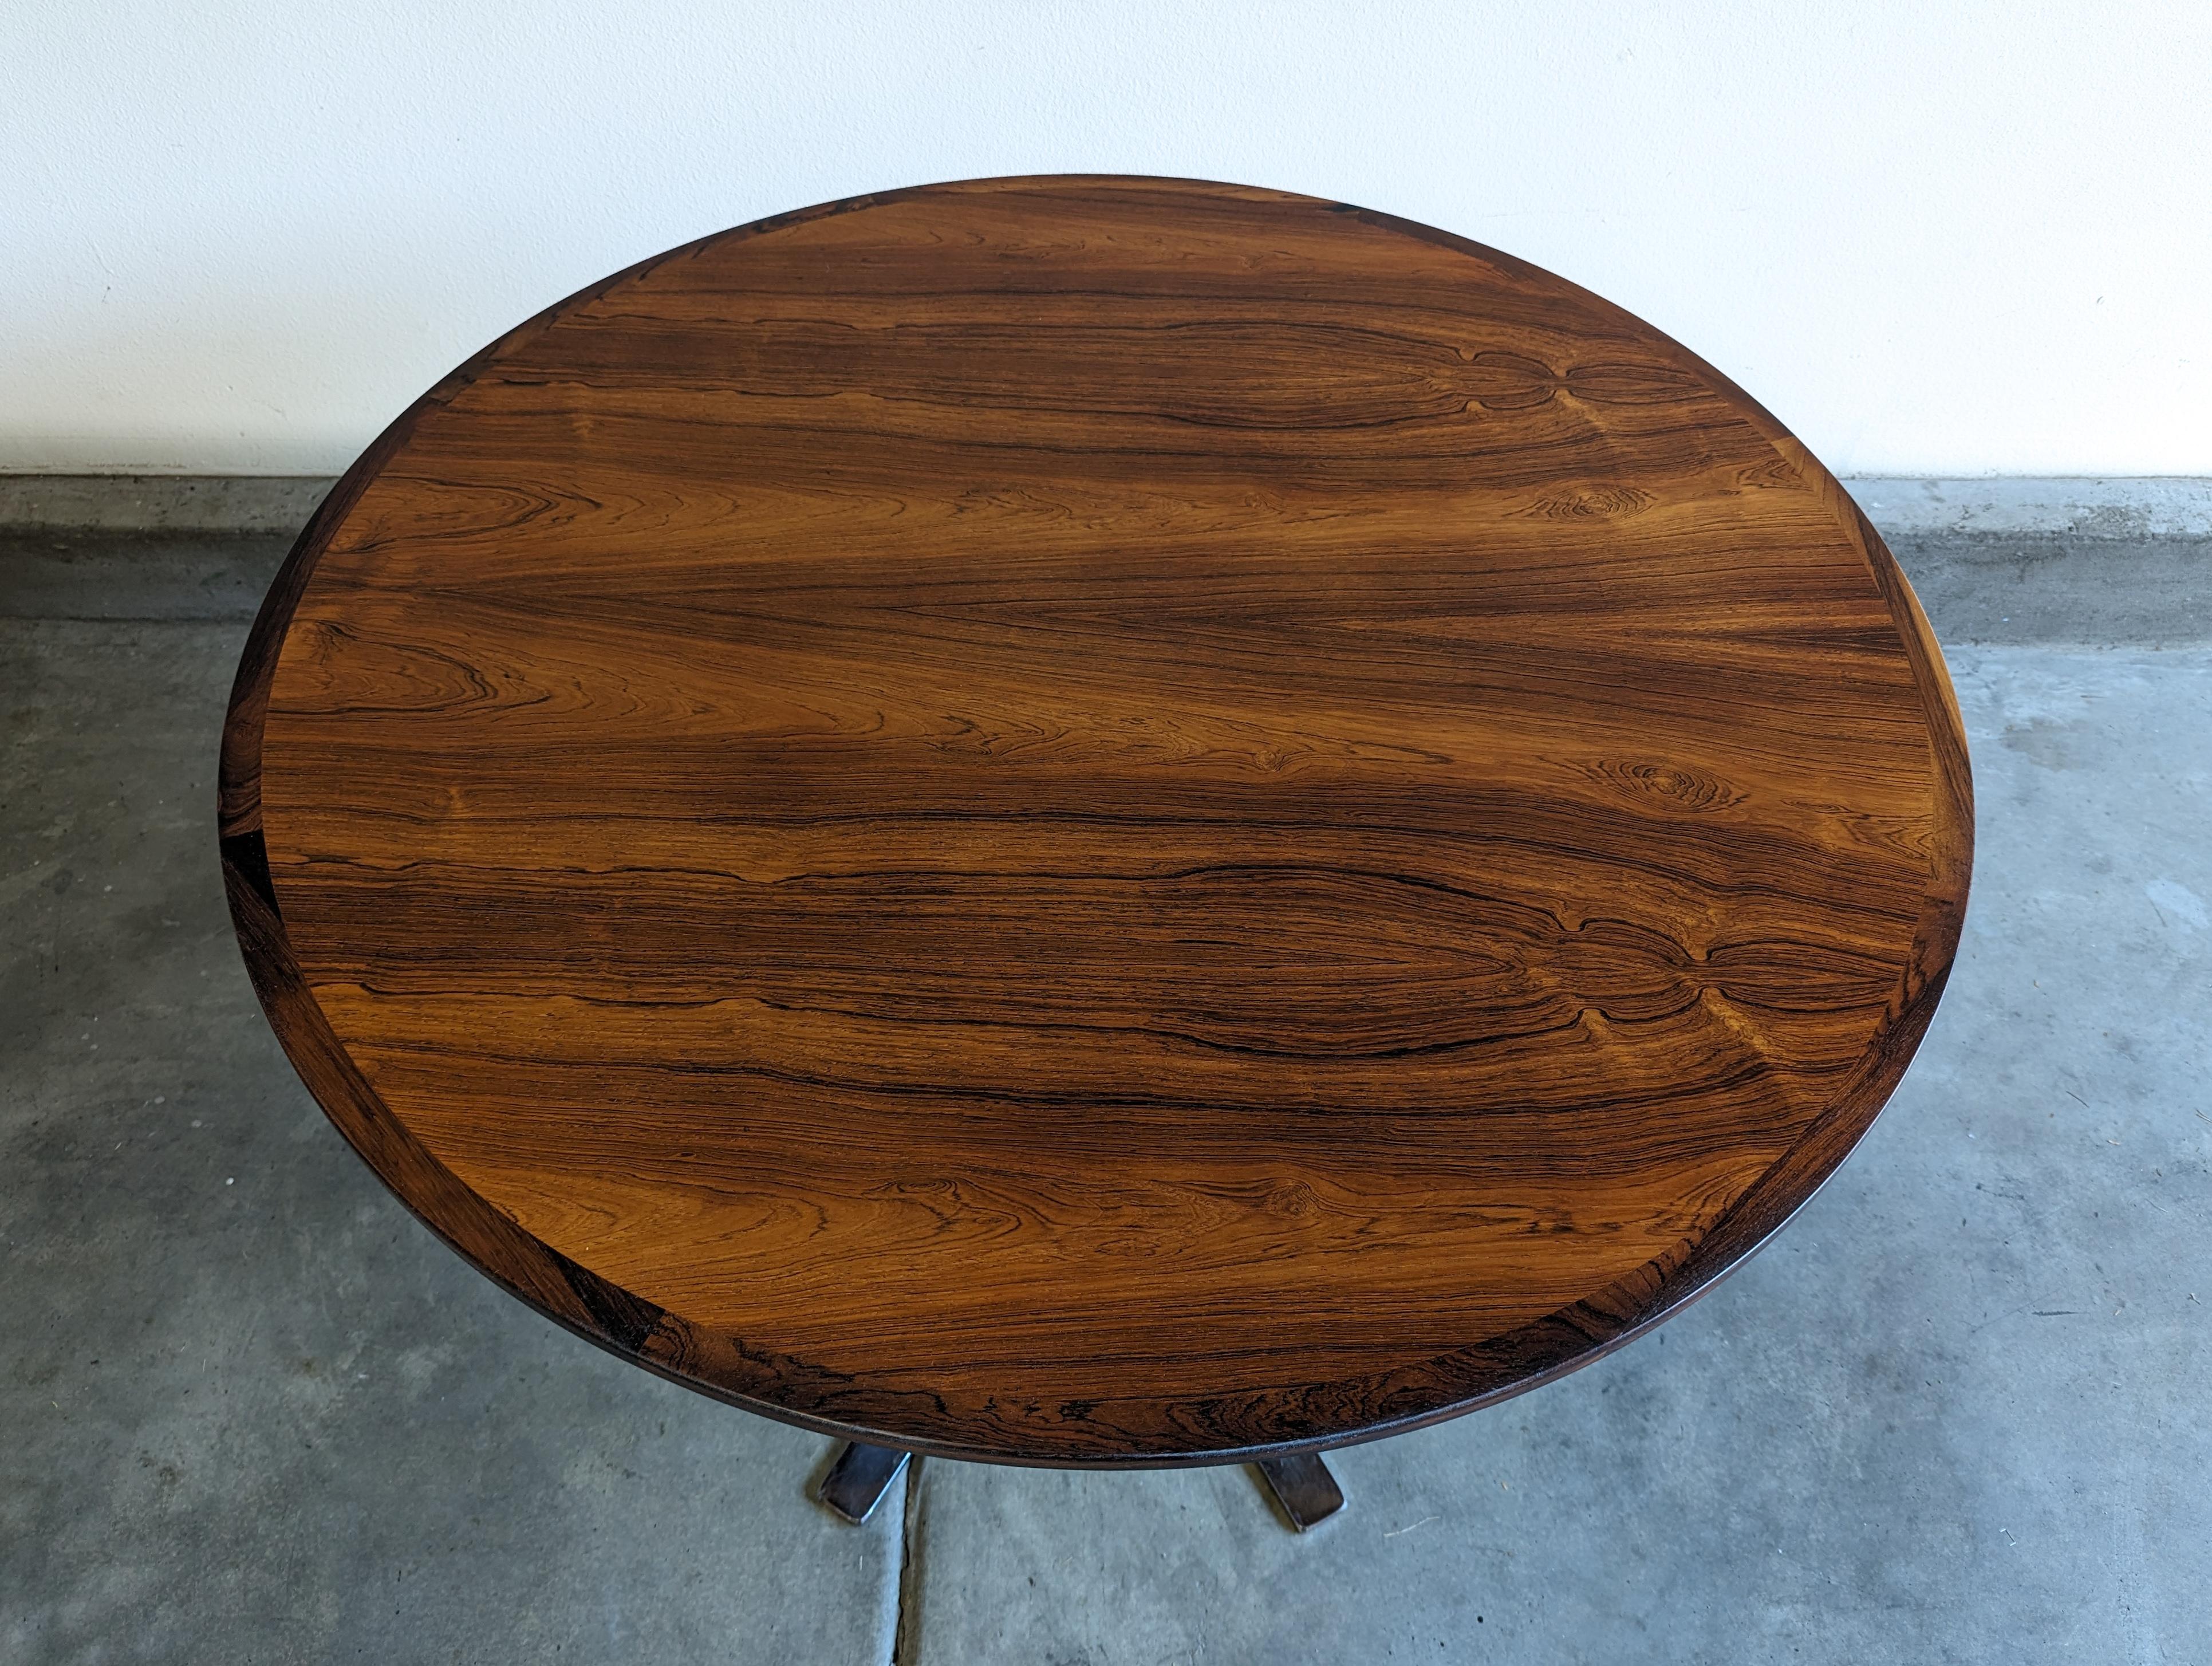 Danish Mid Century Rosewood Flip Flap Circular Dining Table by Dyrlund, c1960s In Excellent Condition For Sale In Chino Hills, CA